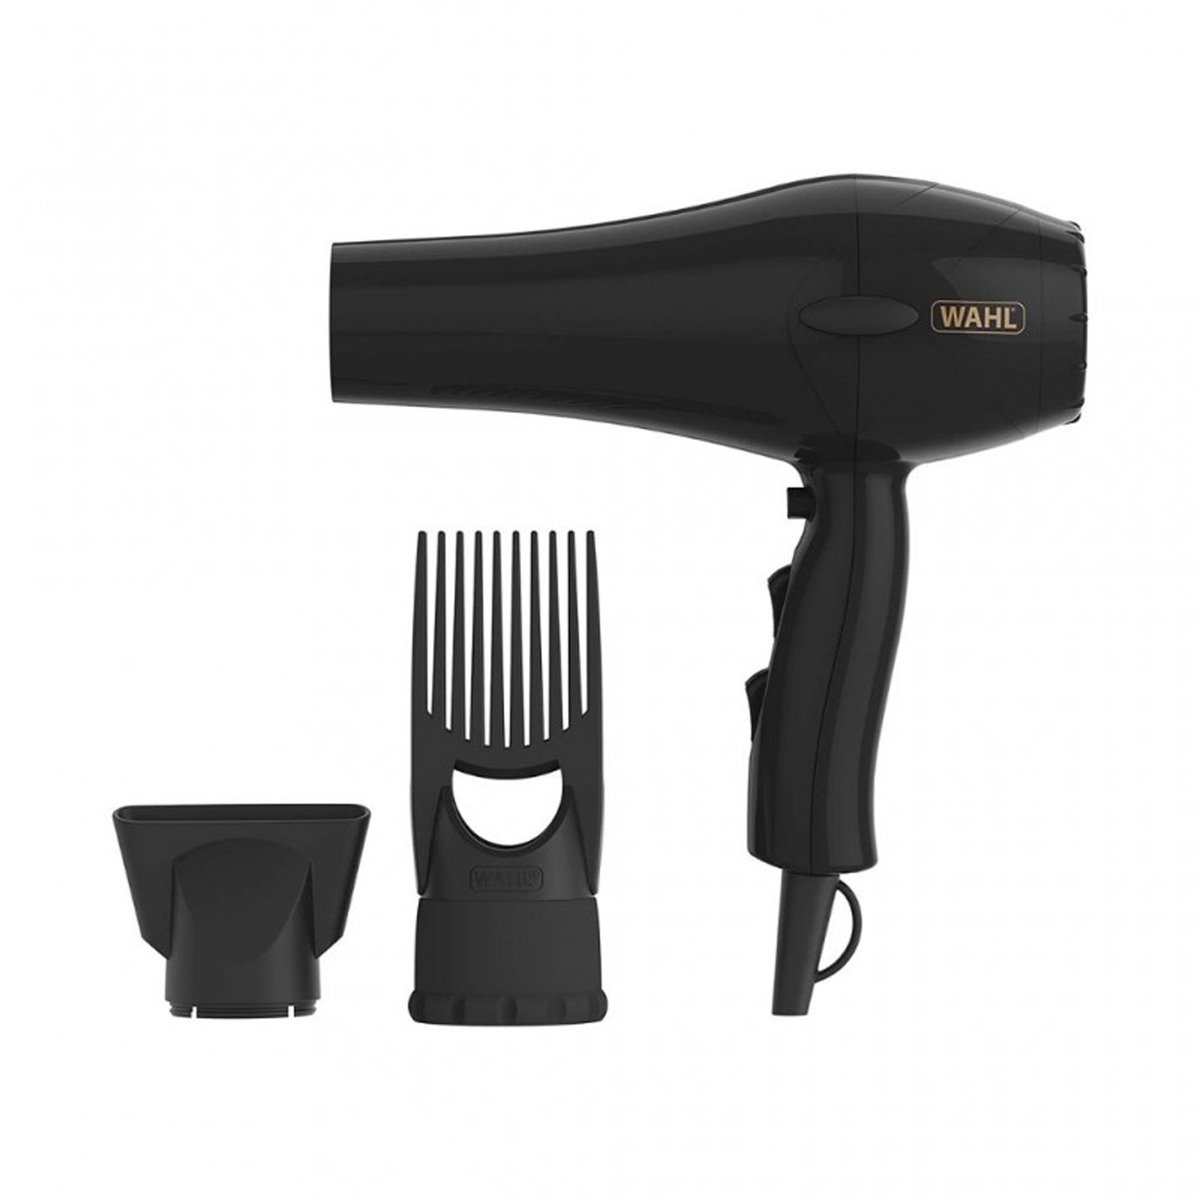 Wahl Hair Dryer Pro Style 05432-027